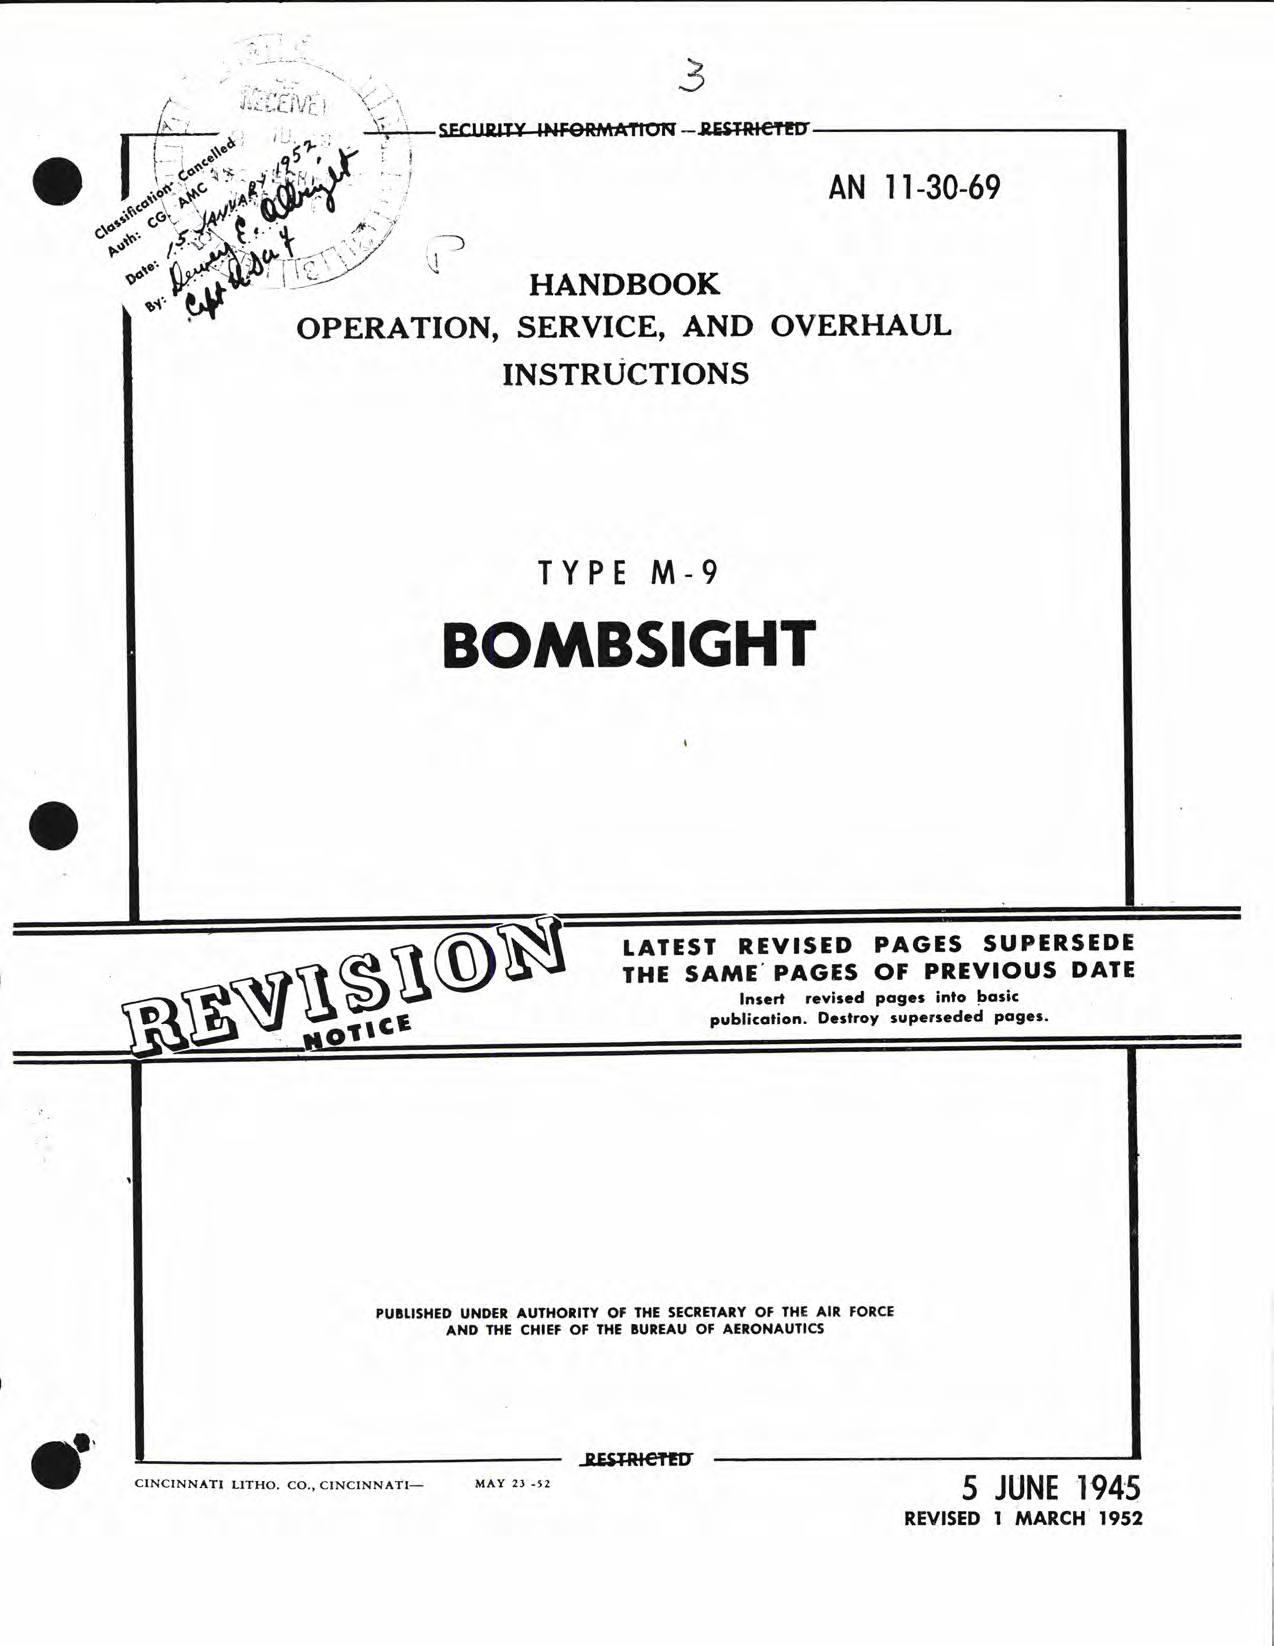 Sample page 1 from AirCorps Library document: Operation, Service, & Overhaul Instructions for Type M-9 Bombsight